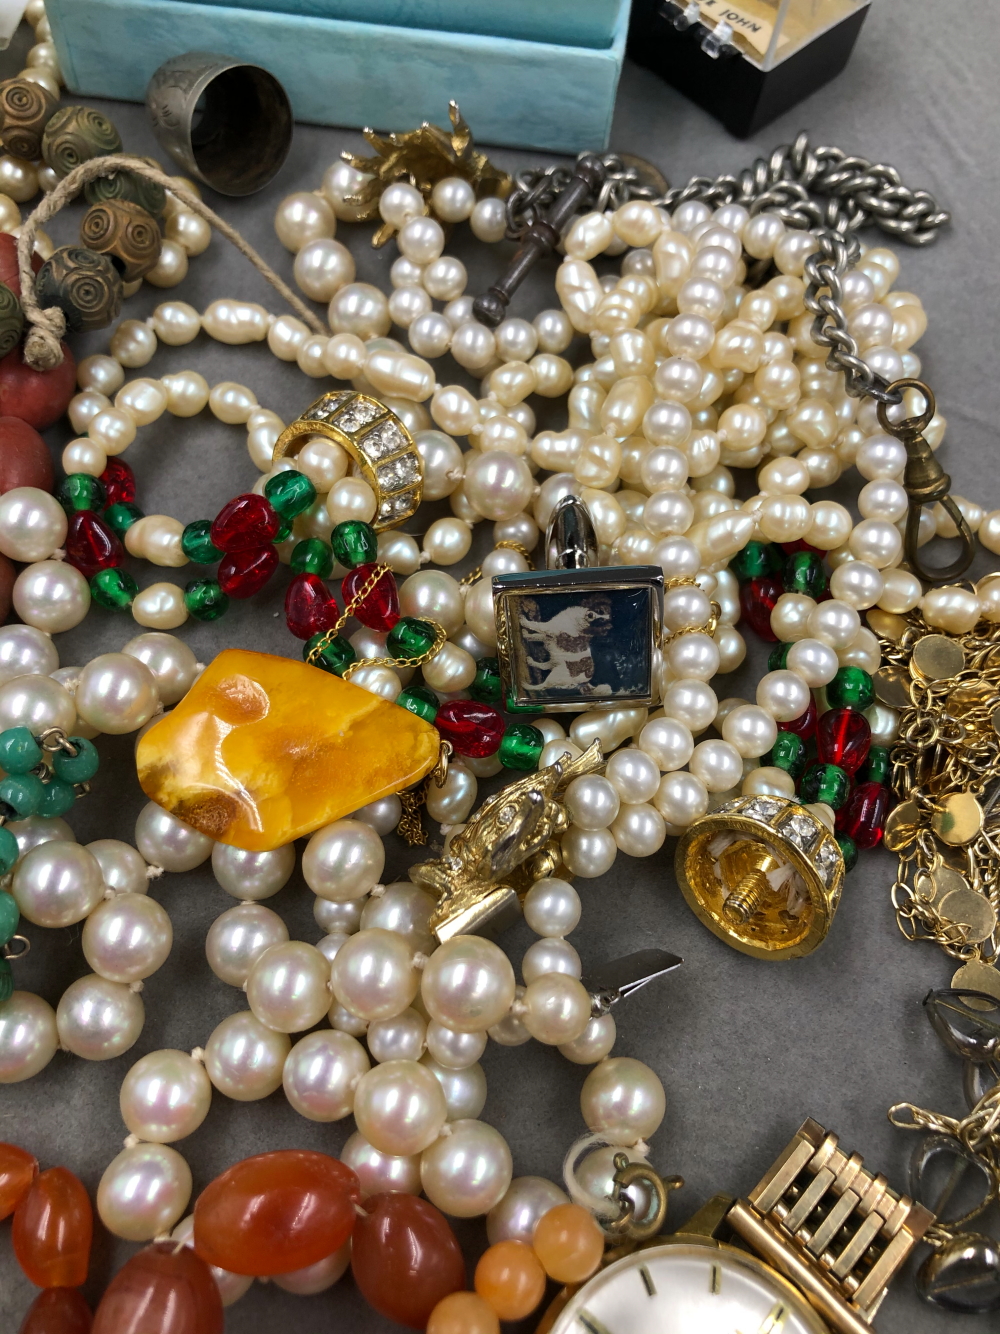 A QUANTITY OF JEWELLERY TO INCLUDE SILVER, COSTUME, BEADS, PEARLS, WATCH KEYS, ETC. - Image 2 of 15